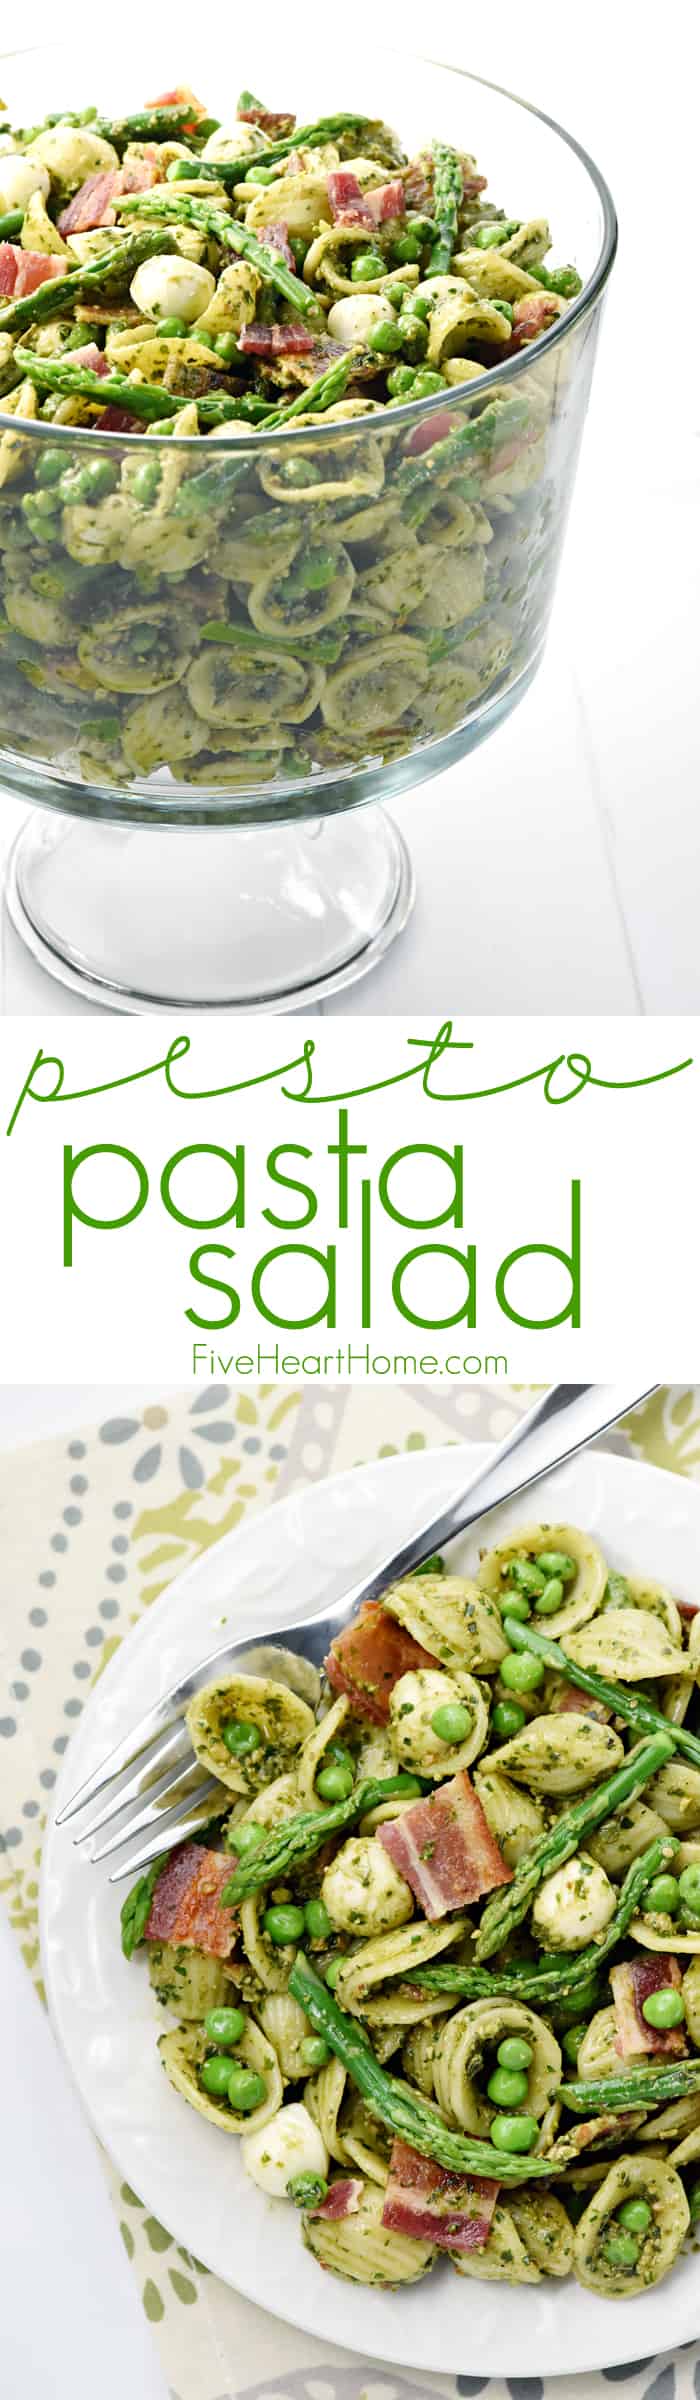 Pesto Pasta Salad ~ studded with bright green asparagus, sweet peas, decadent bacon, and fresh pearls of mozzarella, this pasta salad is a flavorful side dish or light dinner, perfect for spring and summer celebrations! | FiveHeartHome.com via @fivehearthome